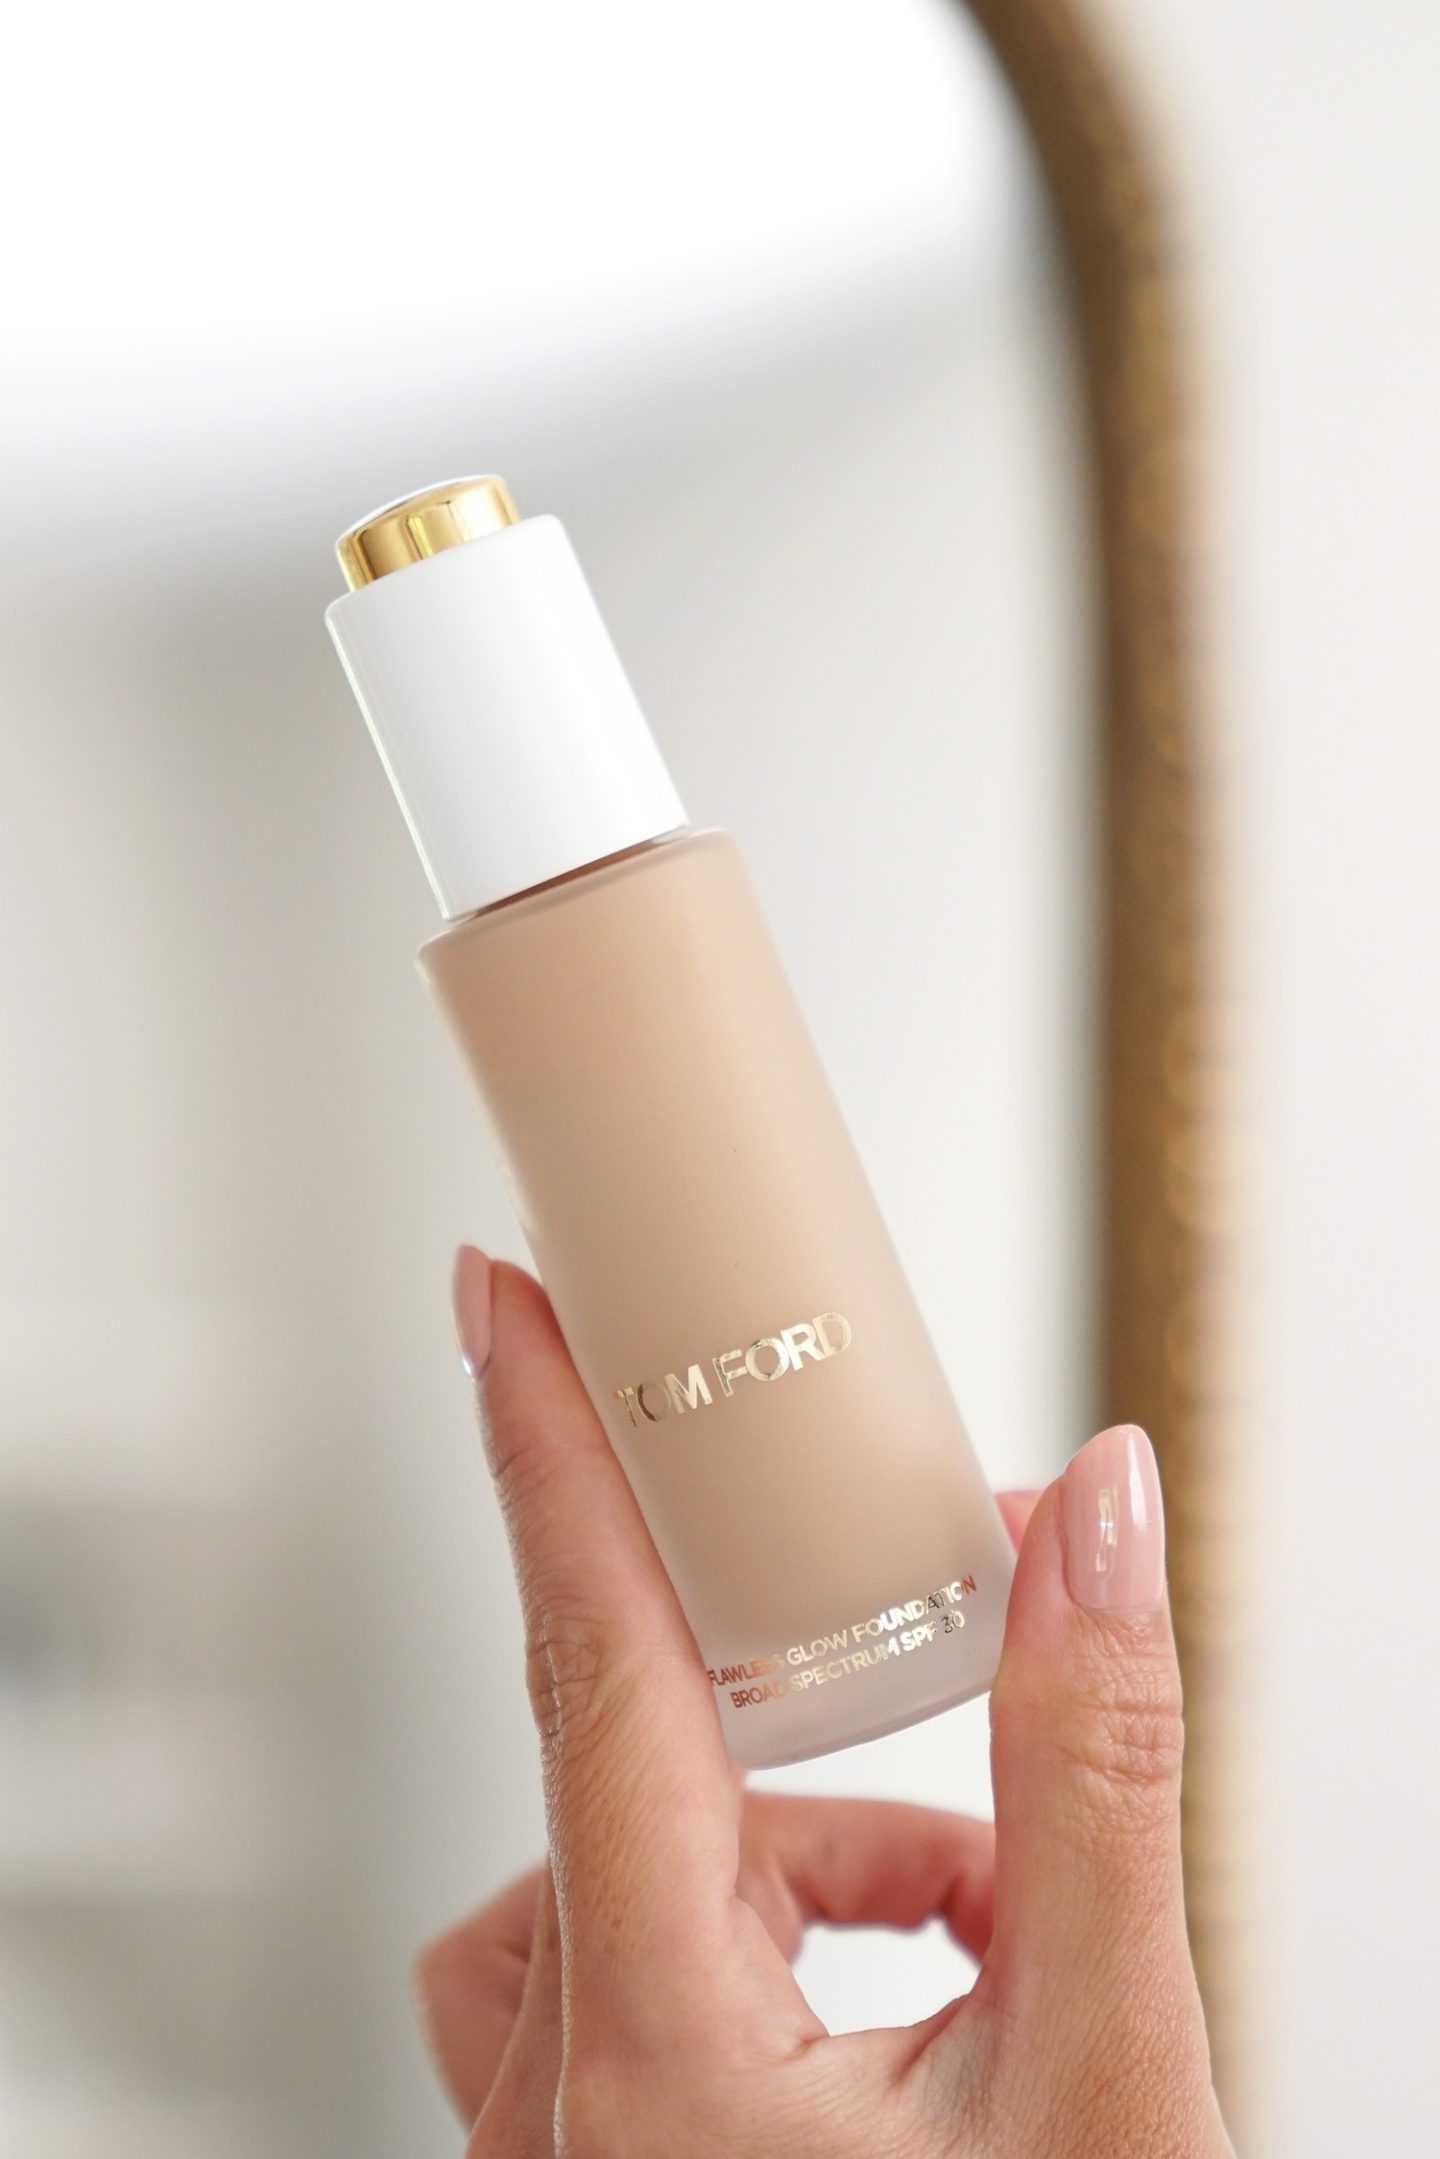 Tom Ford Flawless Glow Foundation in Natural 6.0